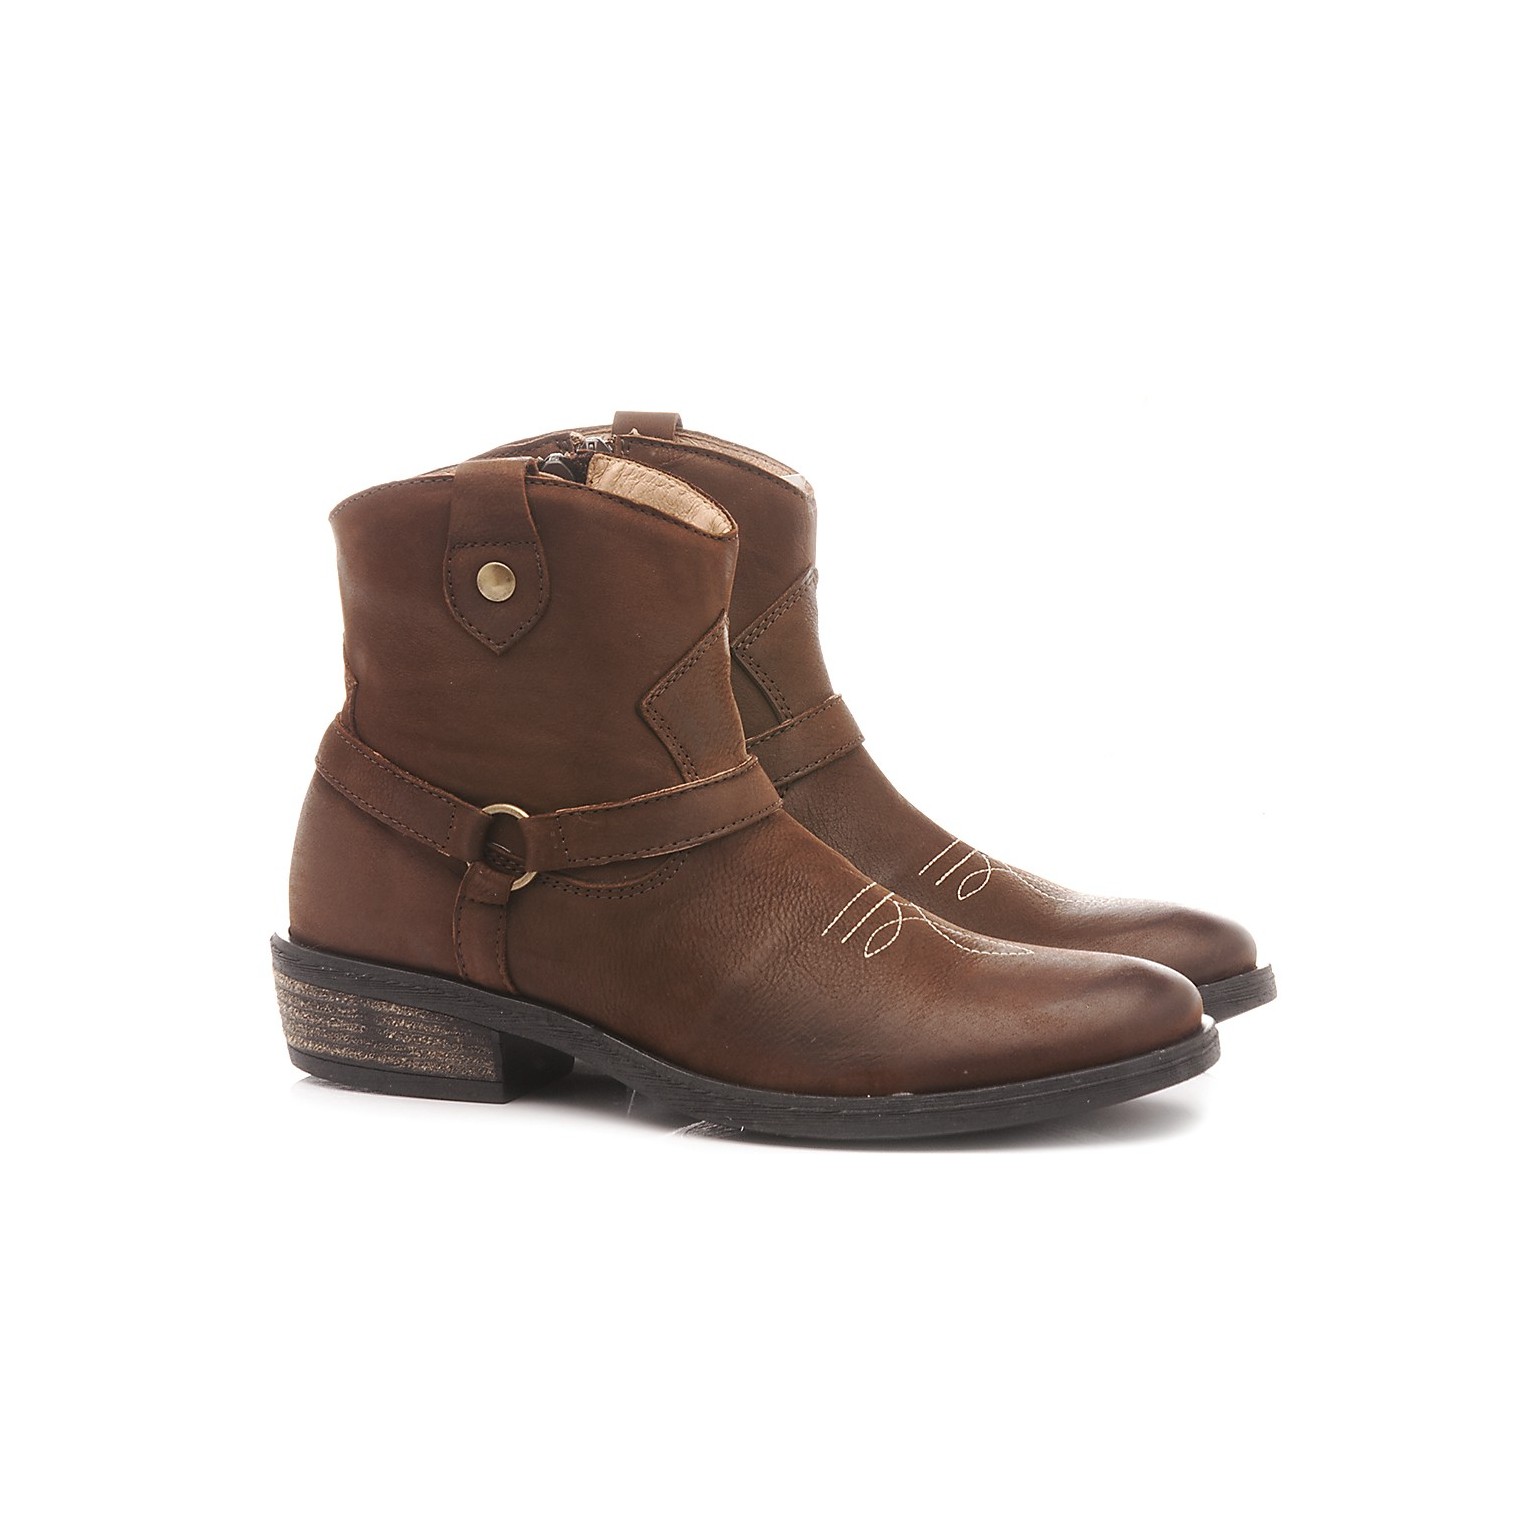 Samuel Children's Ankle Boots Leather IS414-B